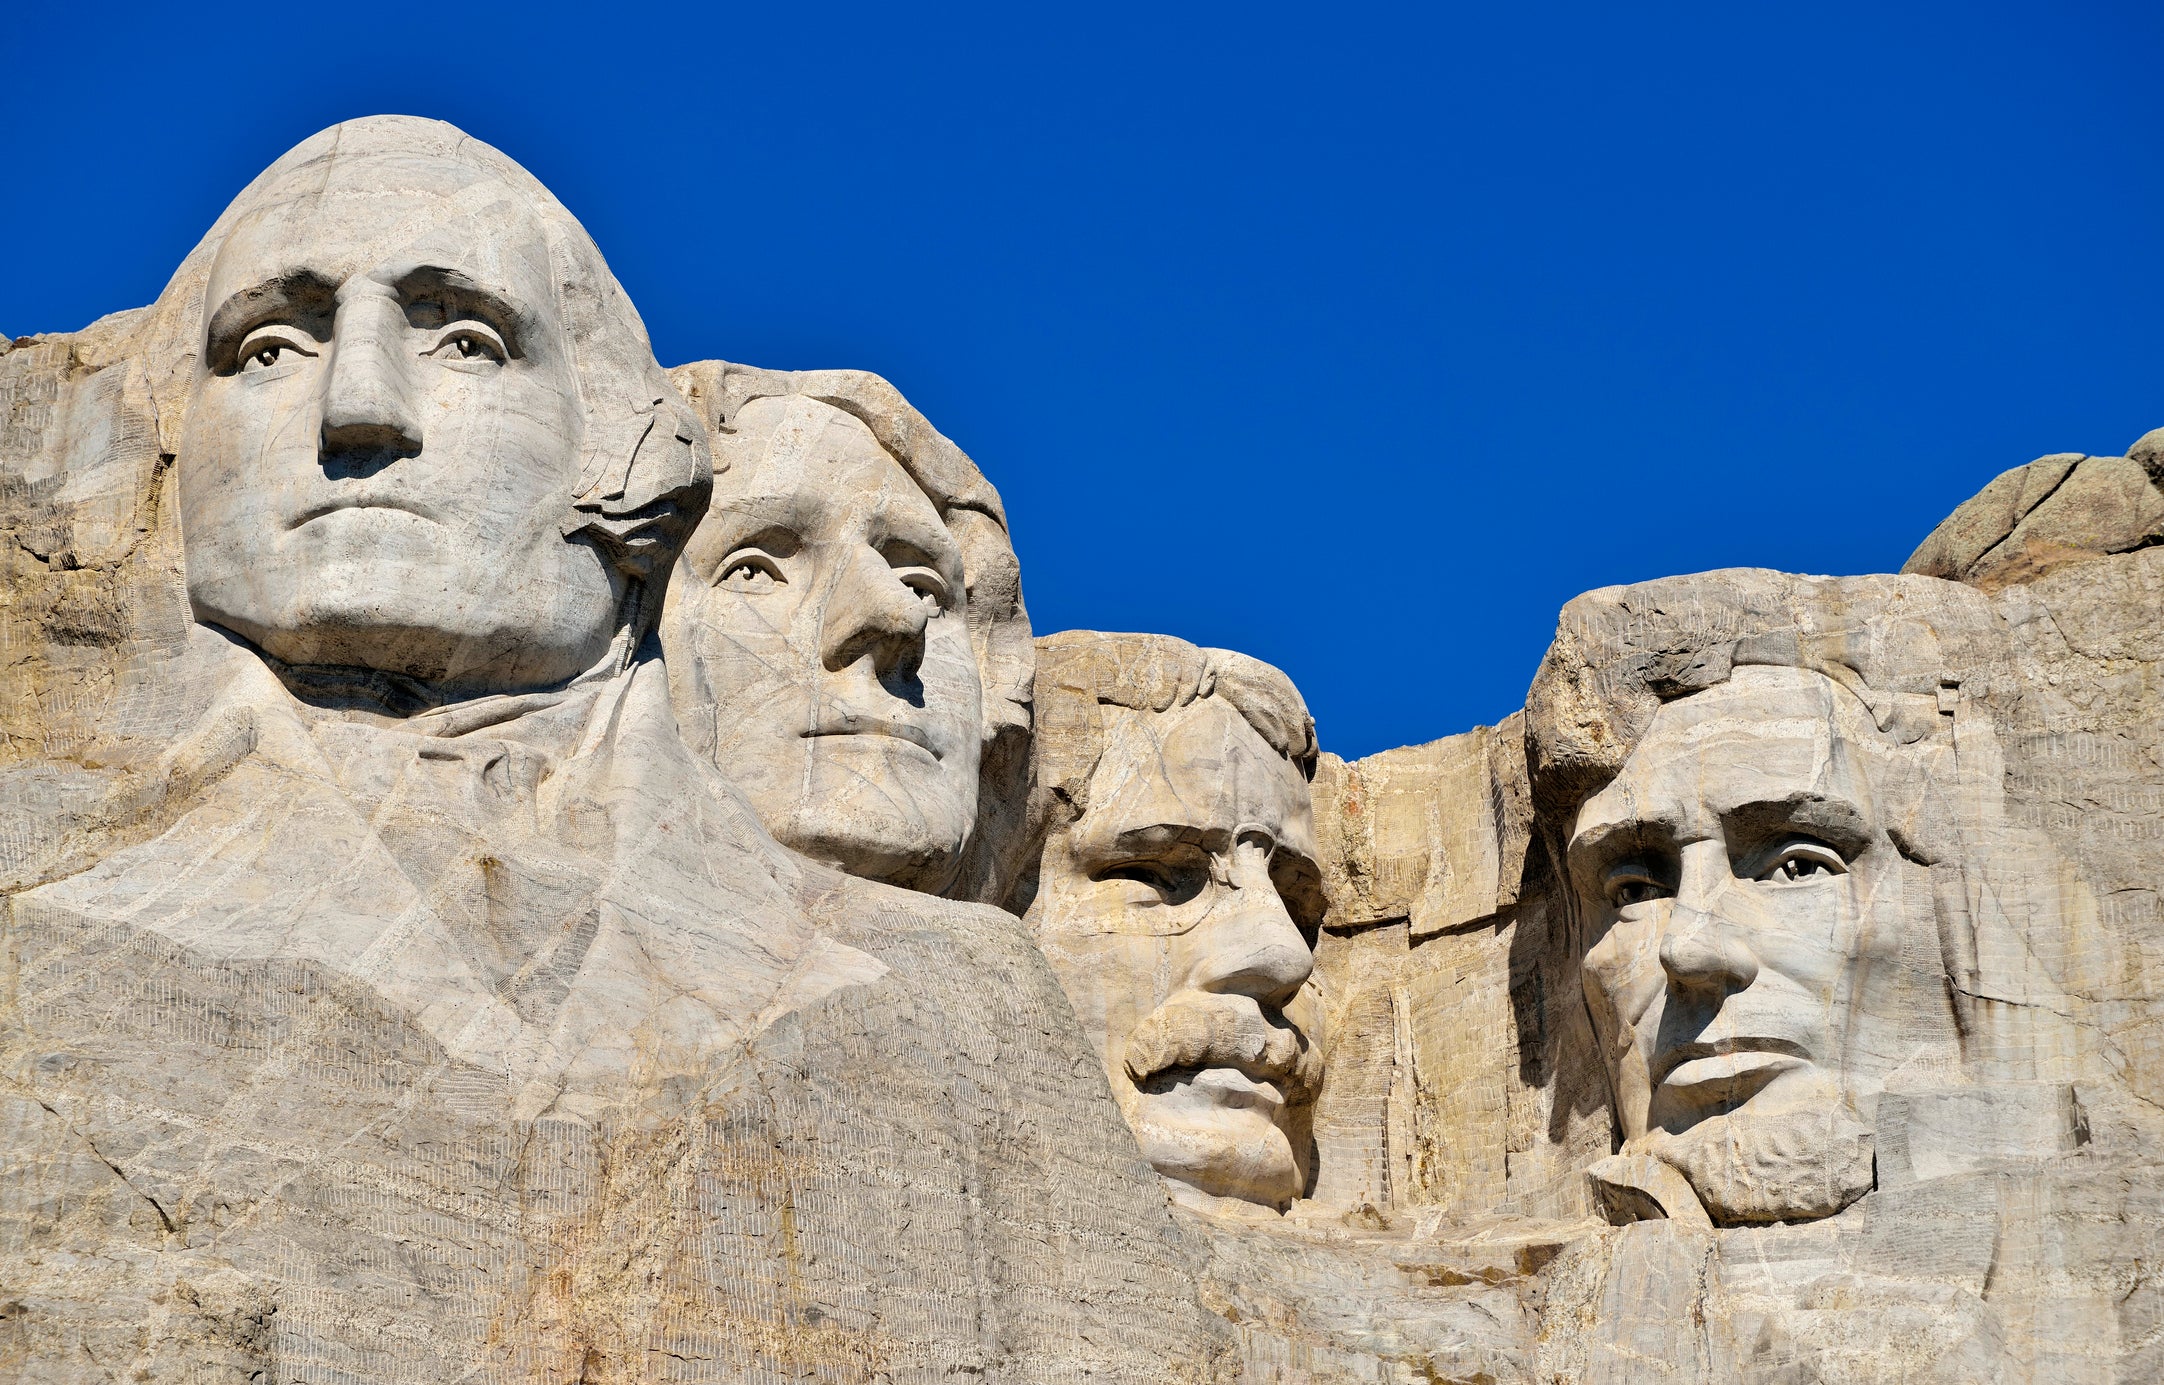 The famous Mount Rushmore National Monument in South Dakota